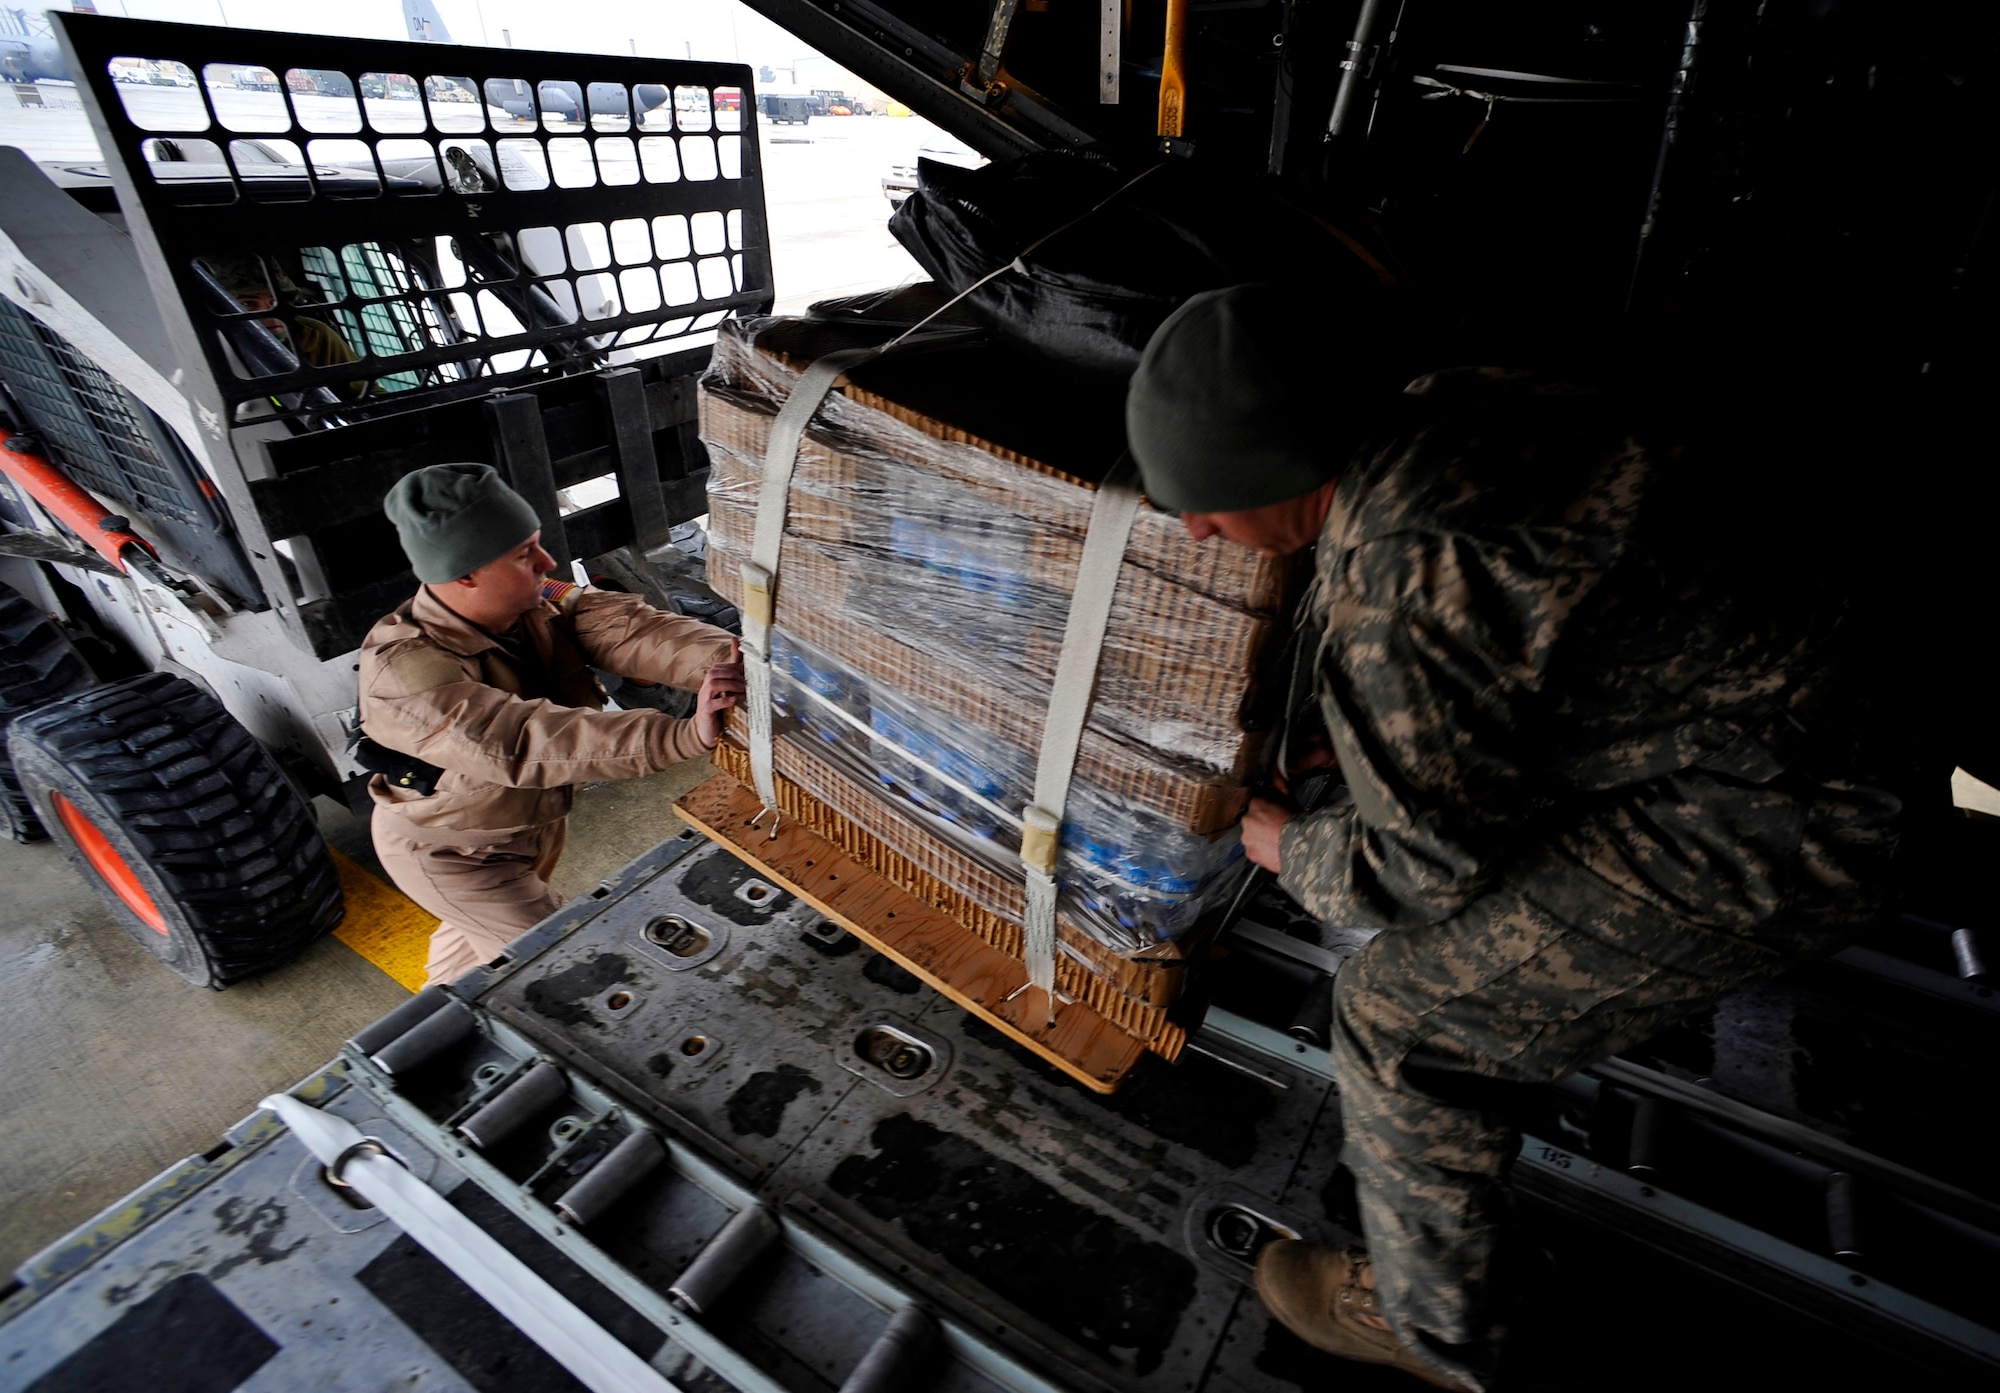 U.S. Air Force Master Sgt. Clay Holt, loadmaster, 774th Expeditionary Airlift Squadron, deployed to Bagram Airfield, Afghanistan, helps U.S. Army Sgt. Matthew Davenport, out-load NCO, Combined Joint Special Operations Task Force Afghanistan, load a C-130H Hercules with low-cost low-altitude re-supply bundles, Feb. 6, 2010. This mission marked the first time an Air Force C-130 crew airdropped LCLA bundles in a combat zone.  (U.S. Air Force photo/Staff Sgt. Angelita Lawrence/released)


